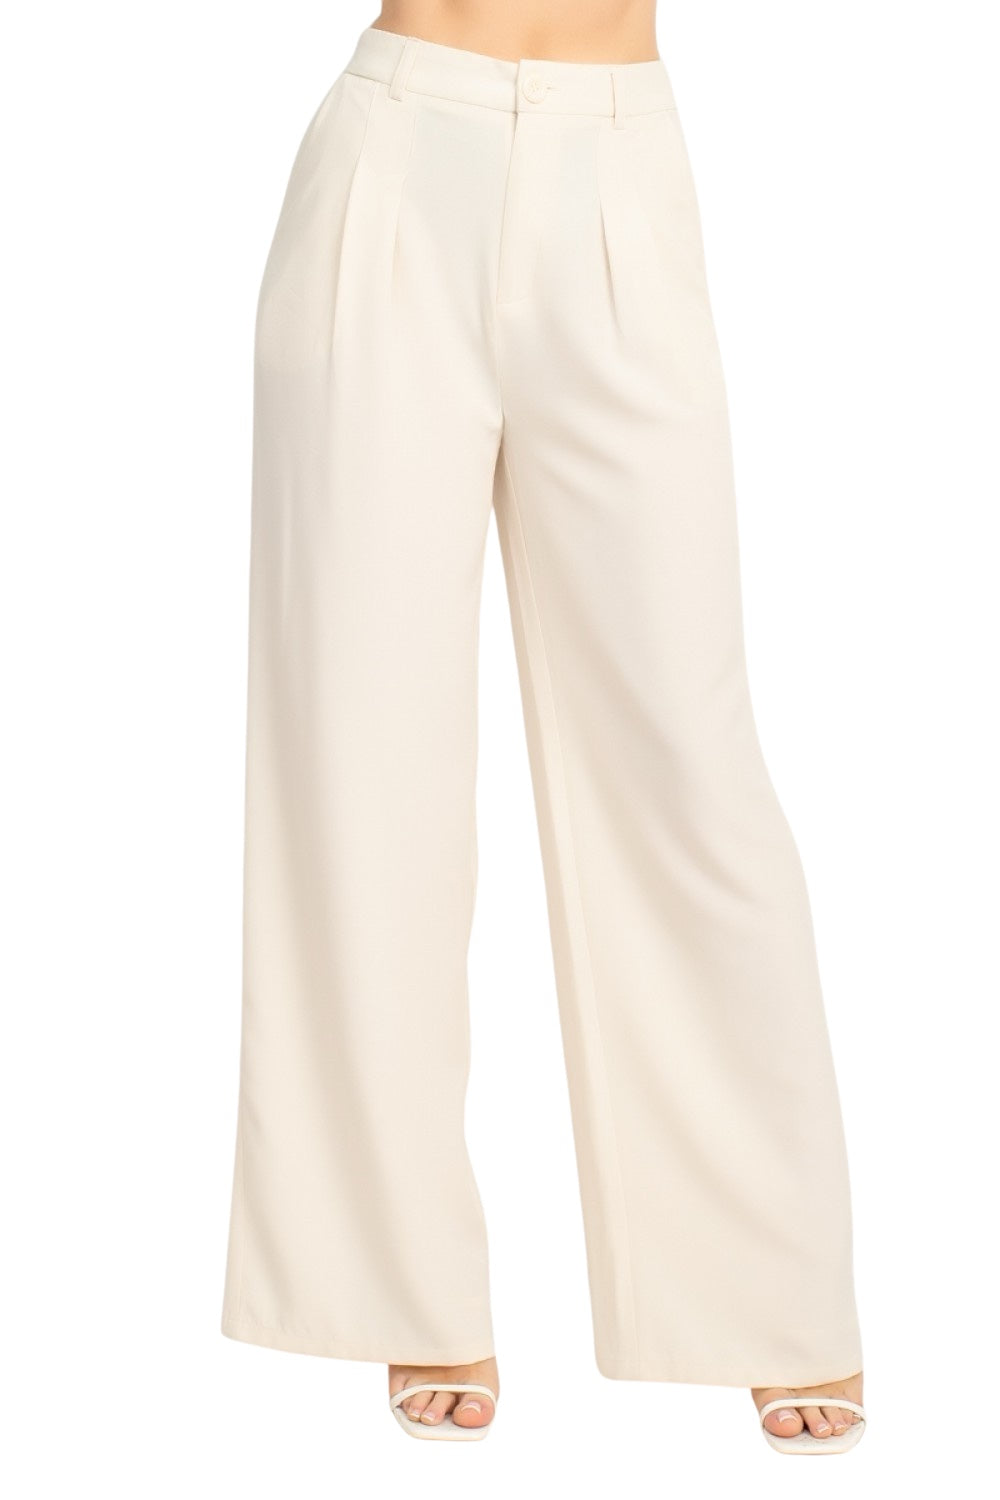 Adore You High Rise Wide Leg Pants in Cream